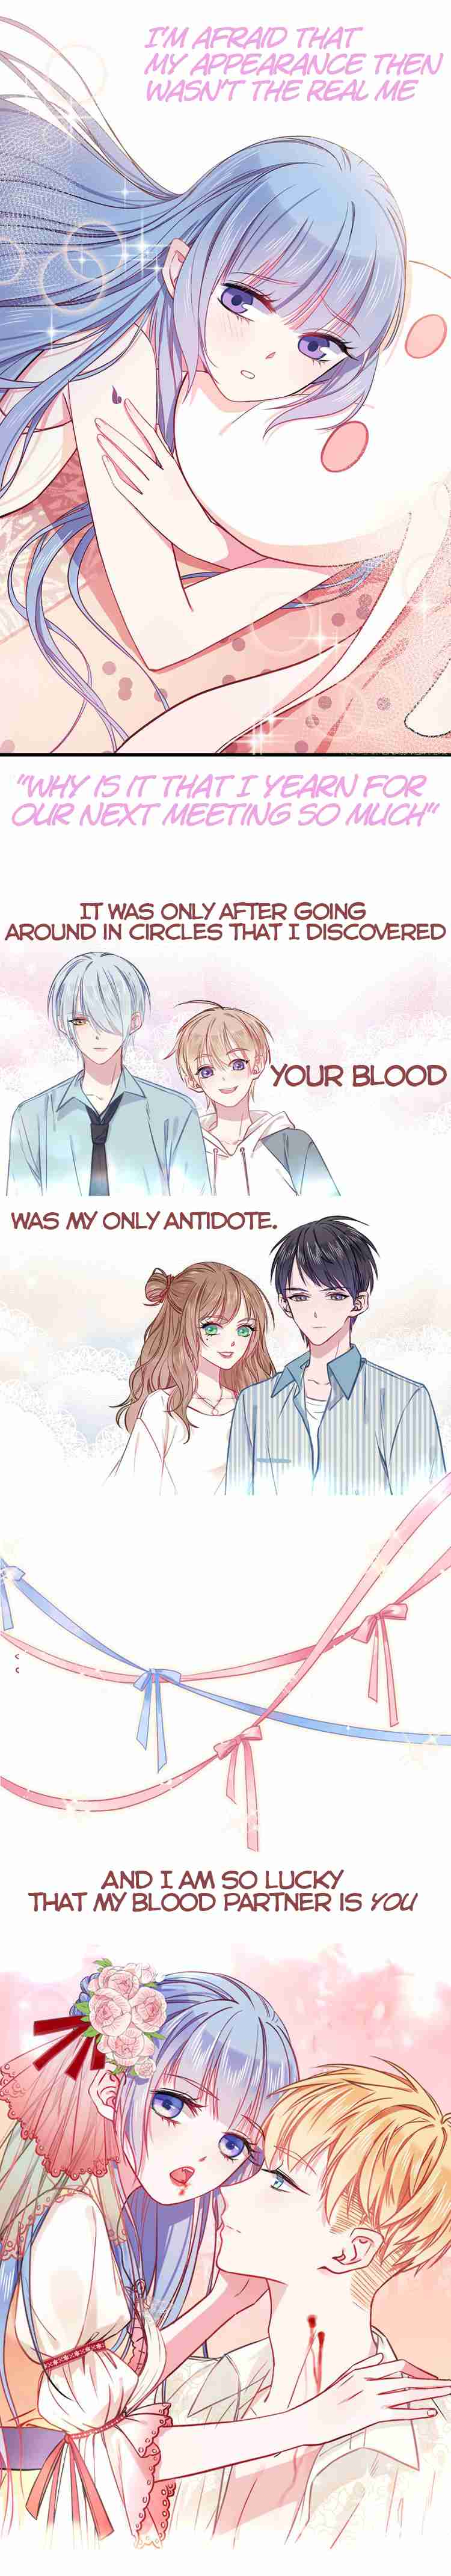 Blood Lovers Vol. 1 Ch. 1 Prologue